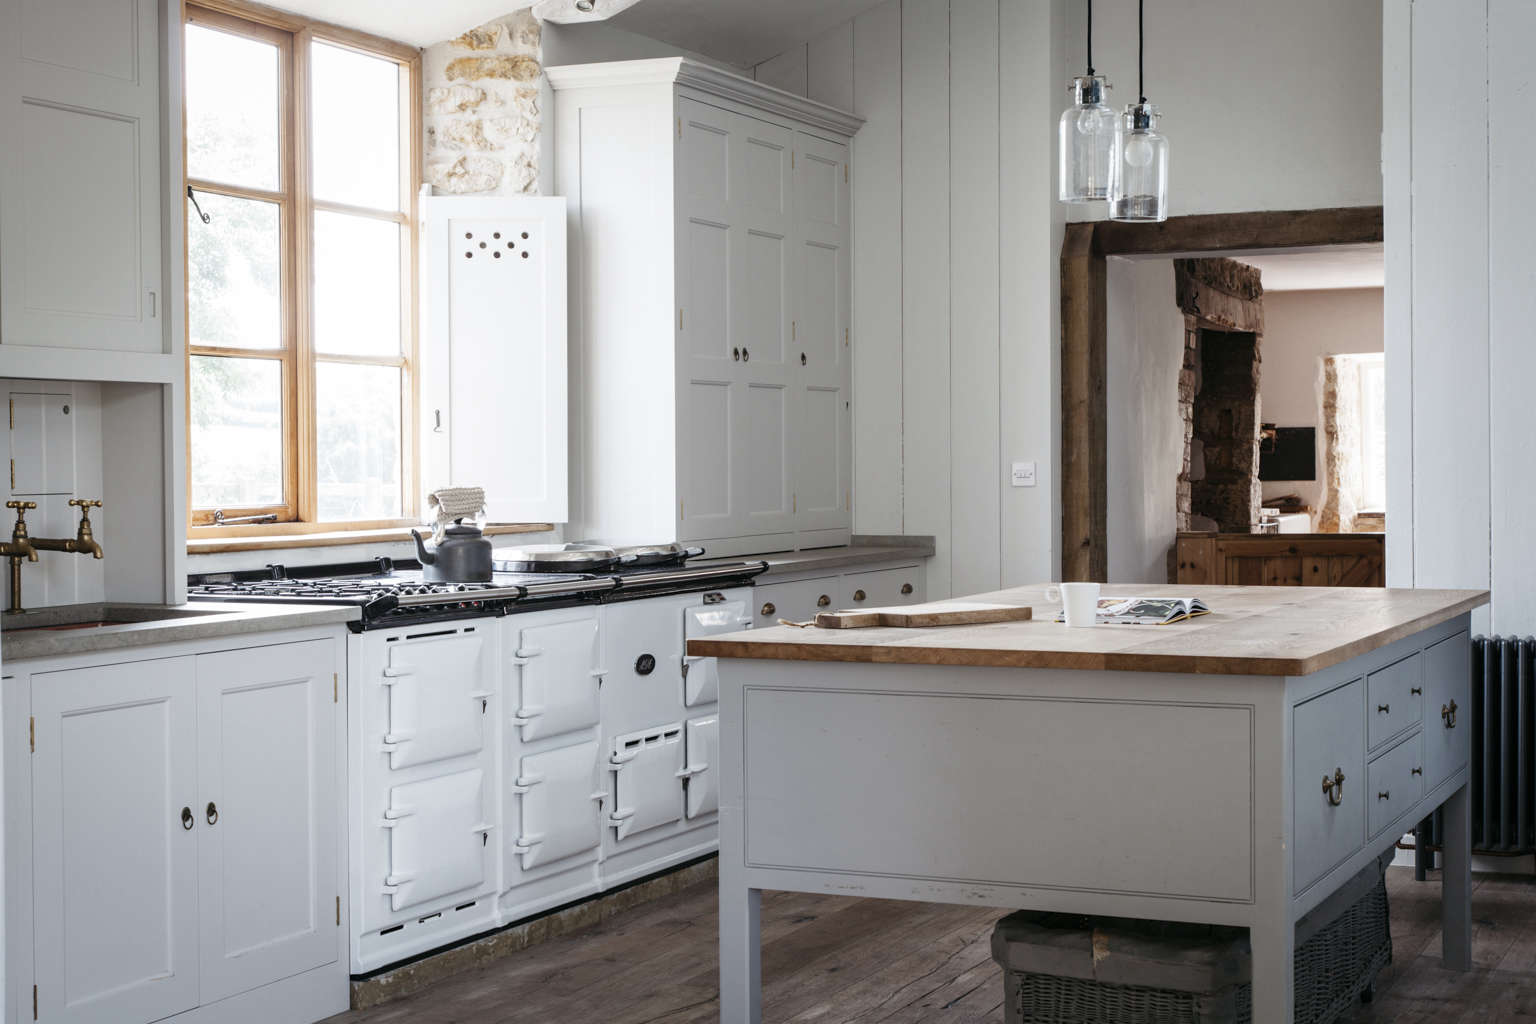 Kitchen of the Week: The Plain English Power in Numbers Kitchen